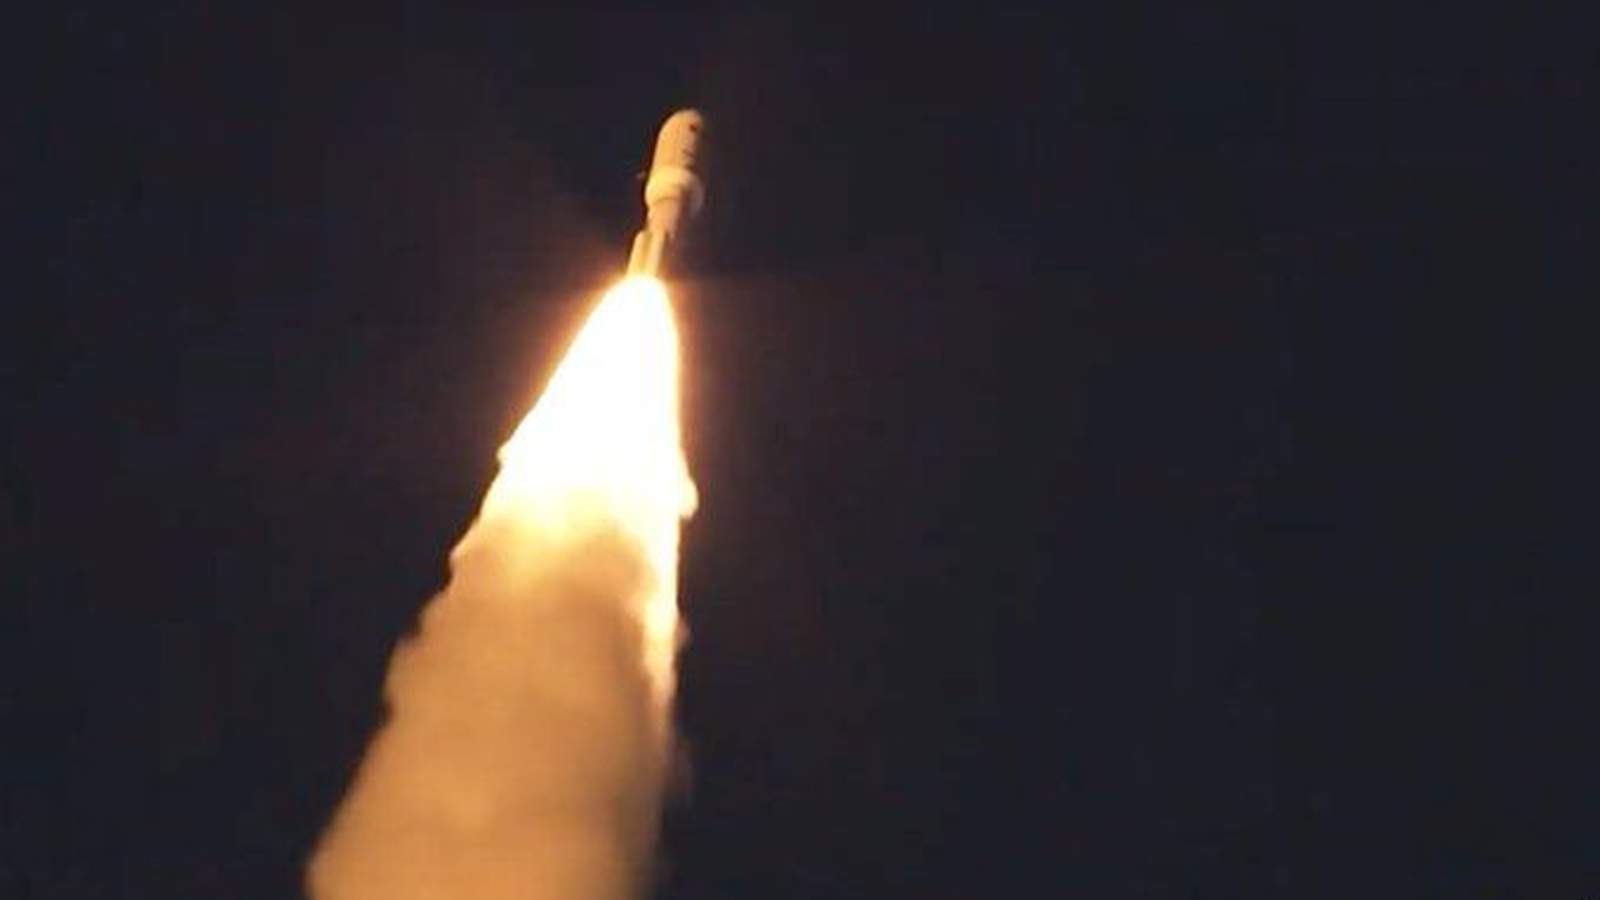 ULA launches national security satellite from Cape Canaveral